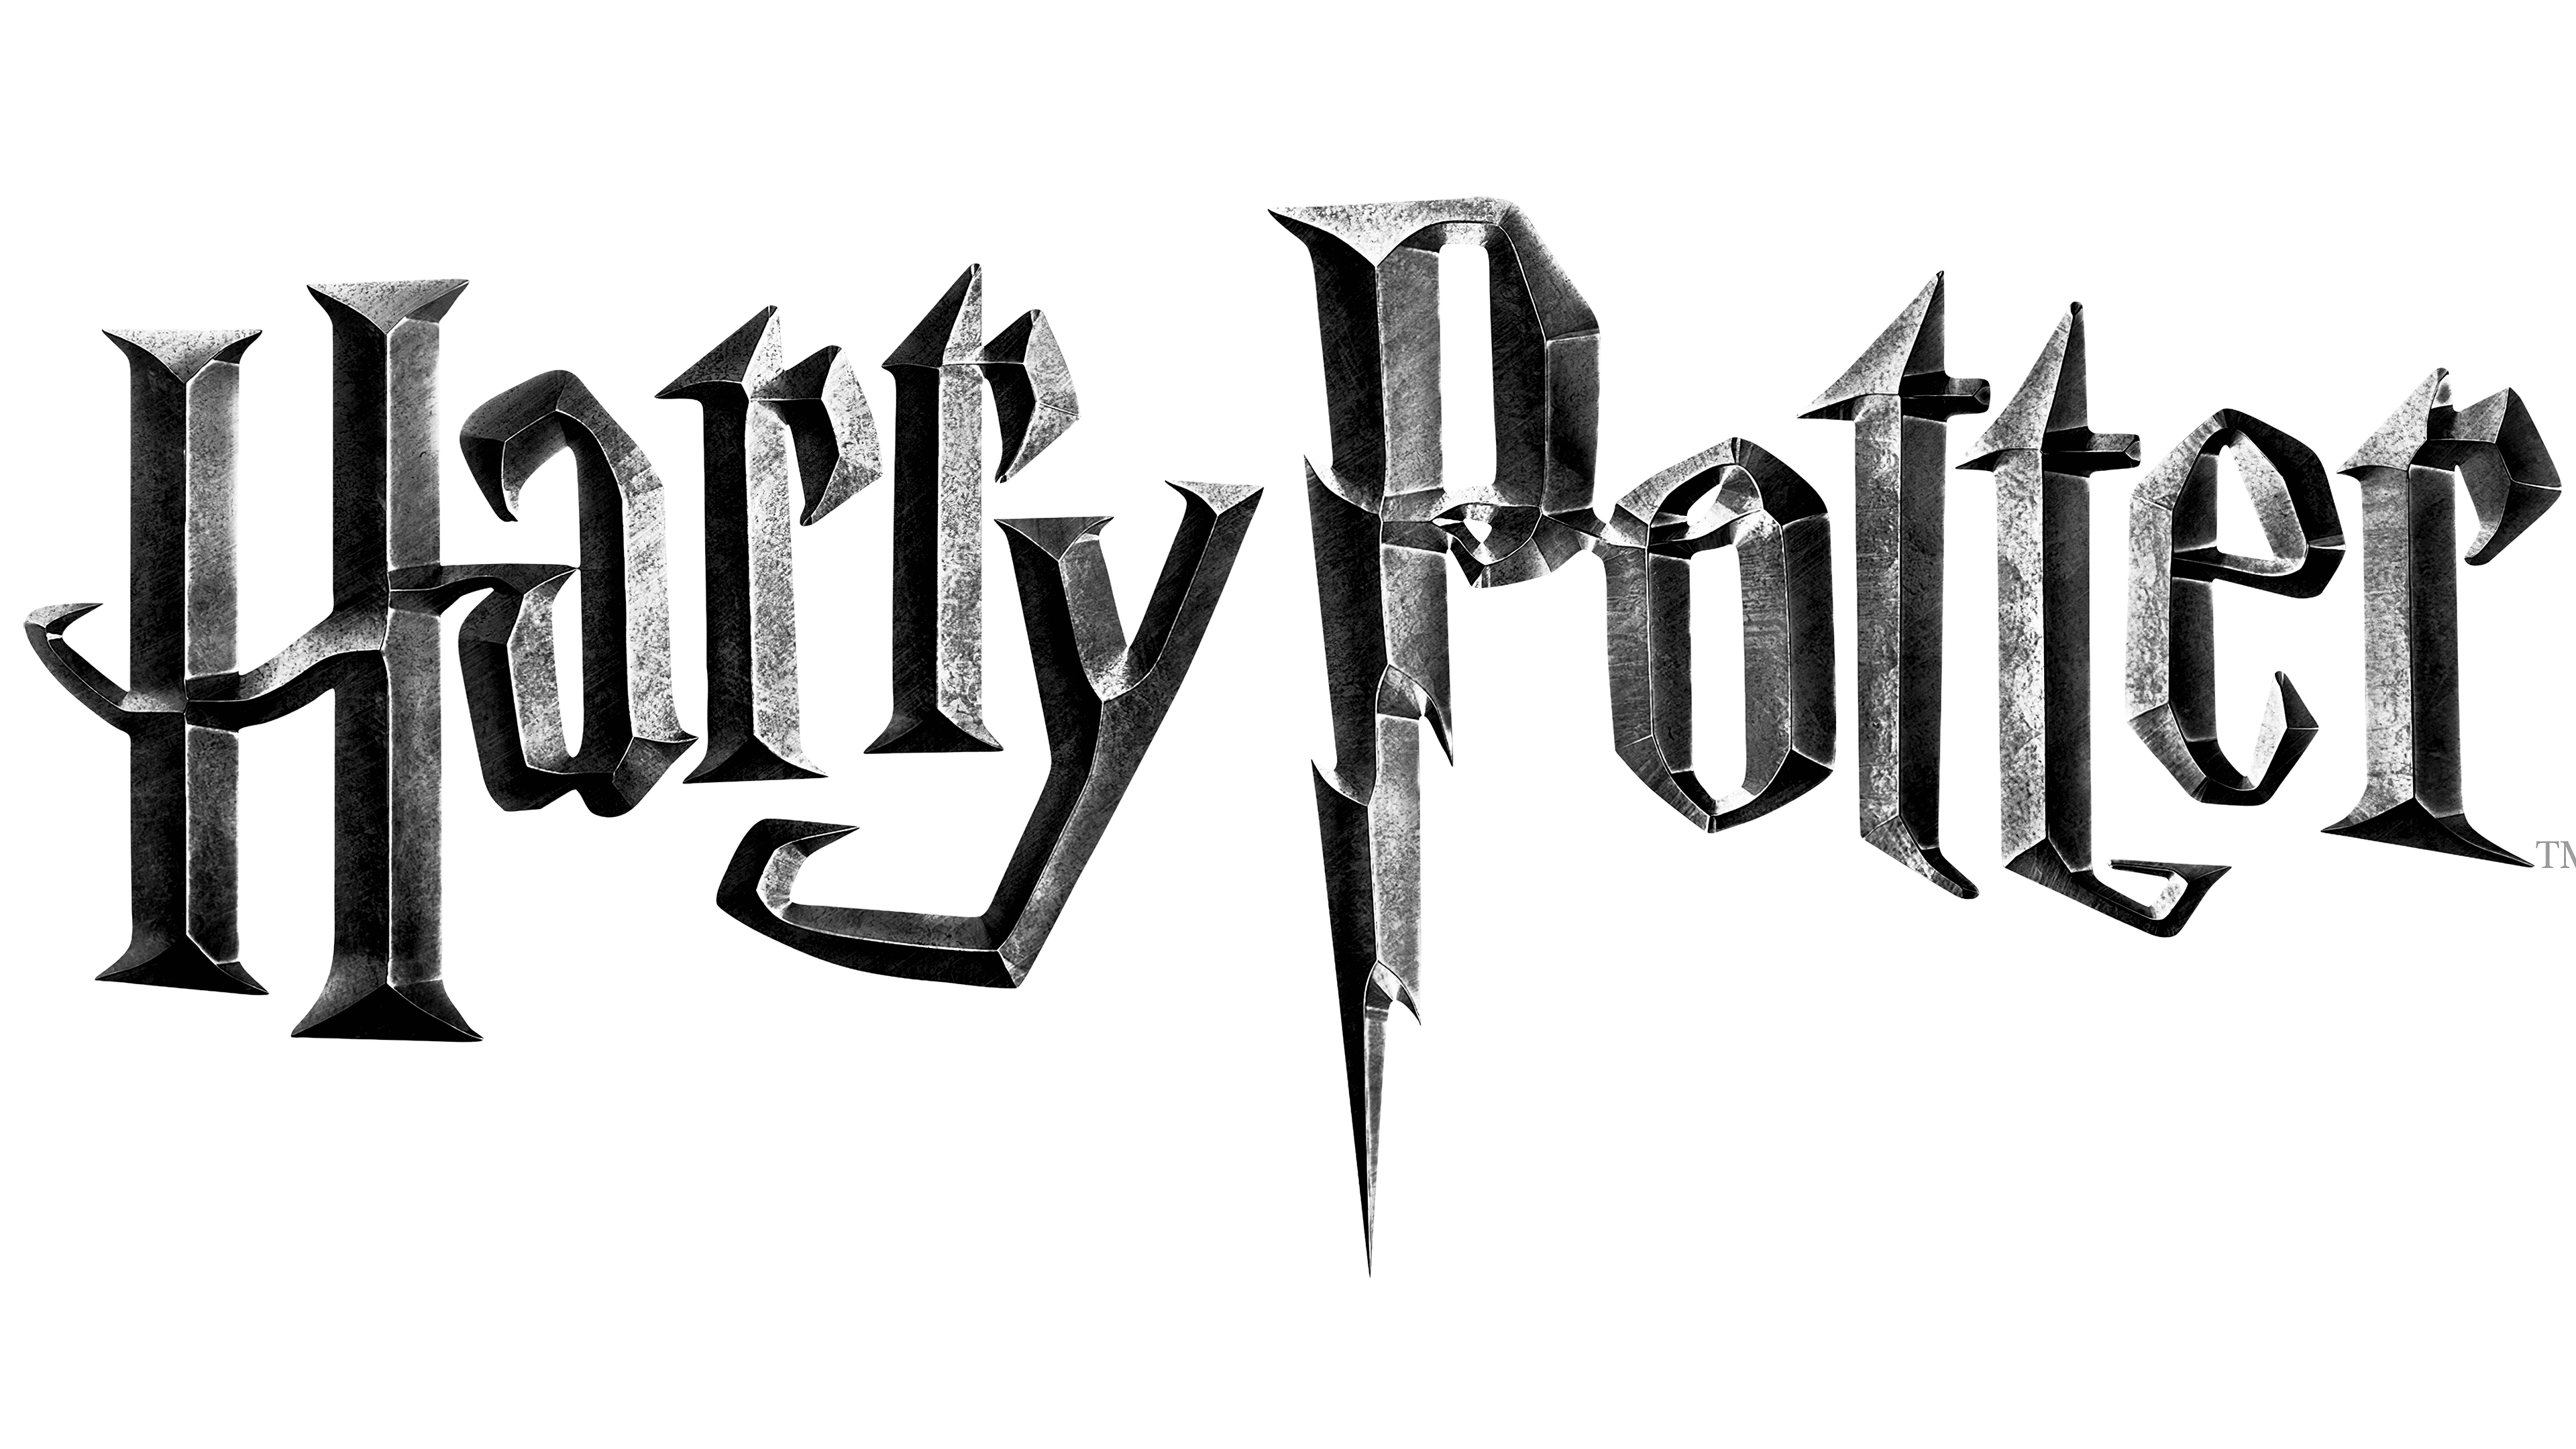 Harry Potter Logo The Most Famous Brands And Company Logos In The World